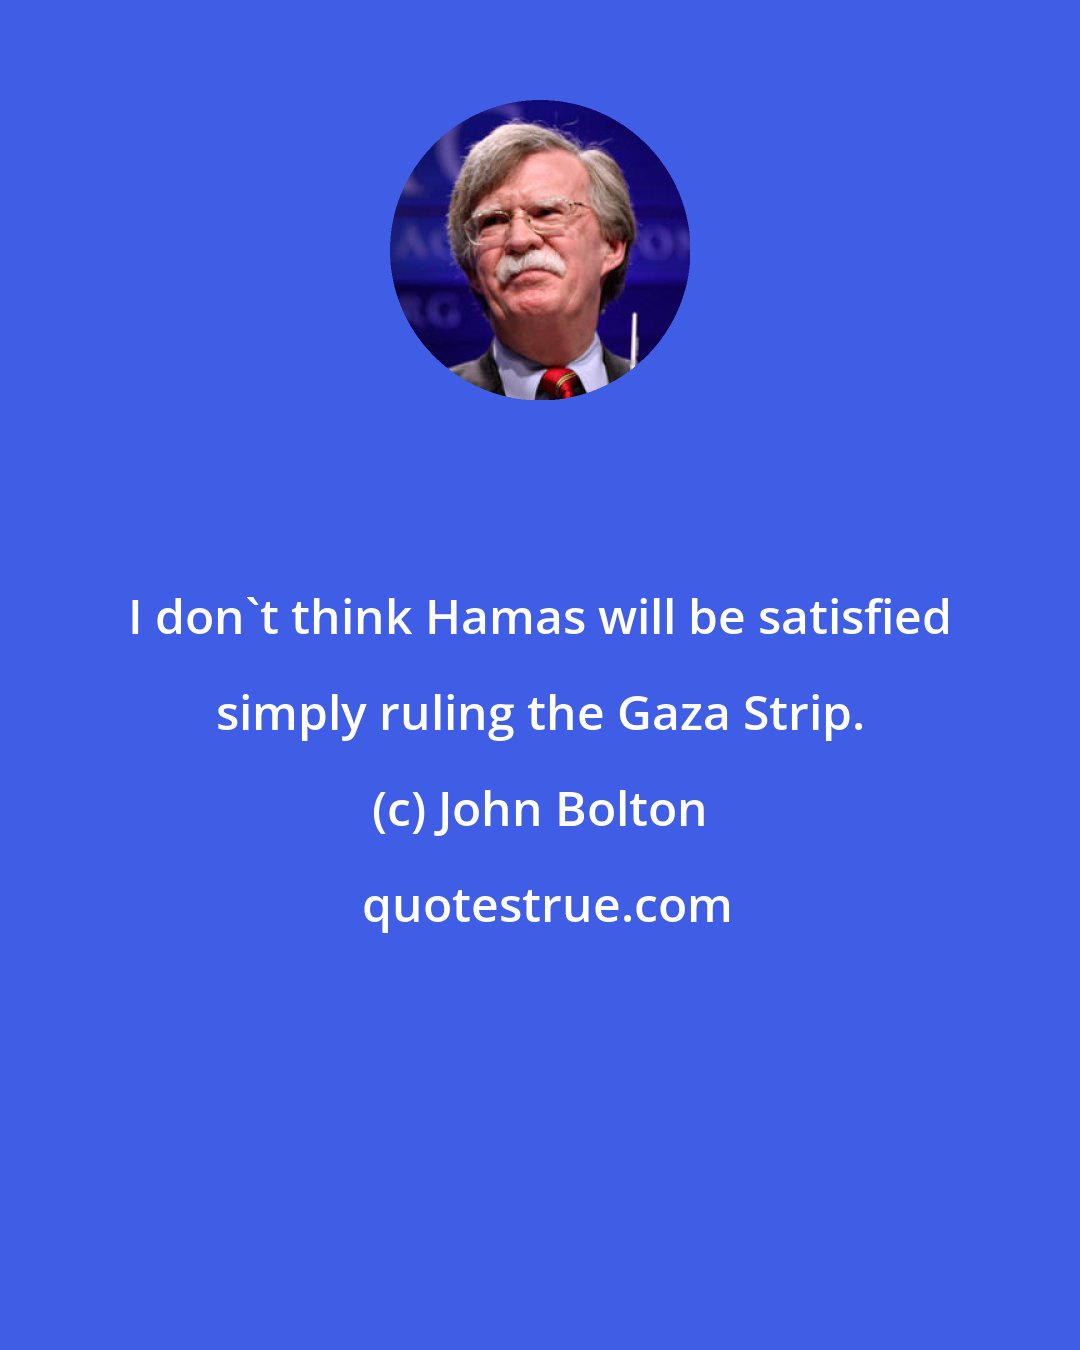 John Bolton: I don't think Hamas will be satisfied simply ruling the Gaza Strip.